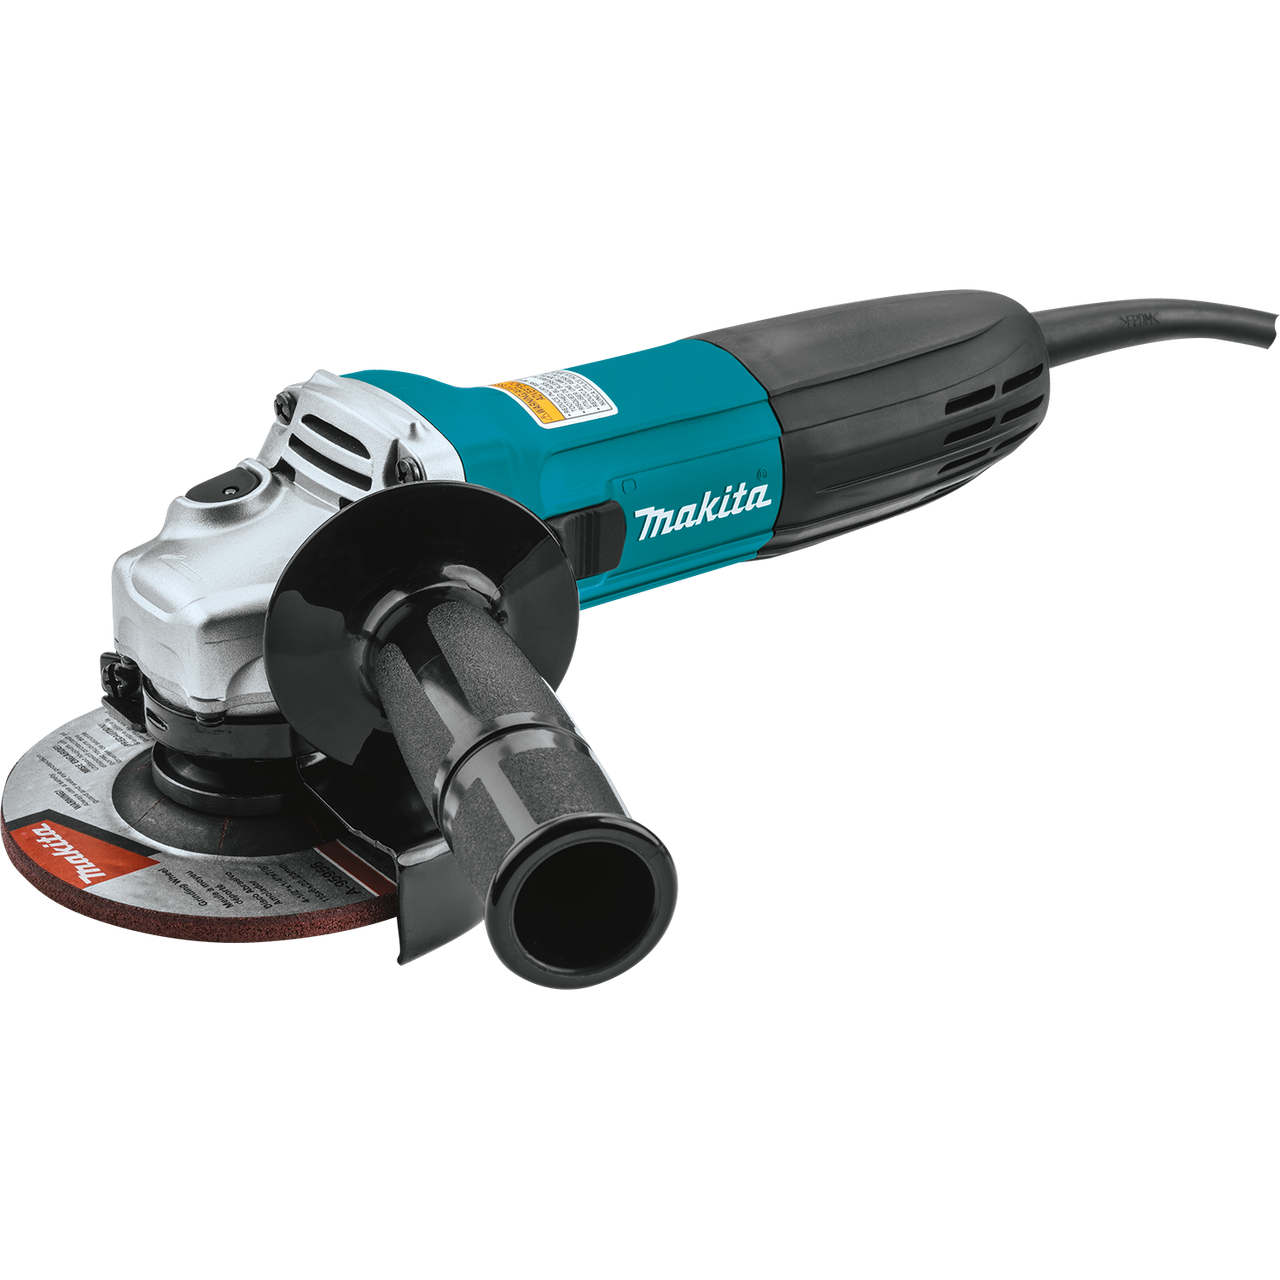 4-1/2" Angle Grinder, with 5 Wheels, Labyrinth Construction, GA4530X